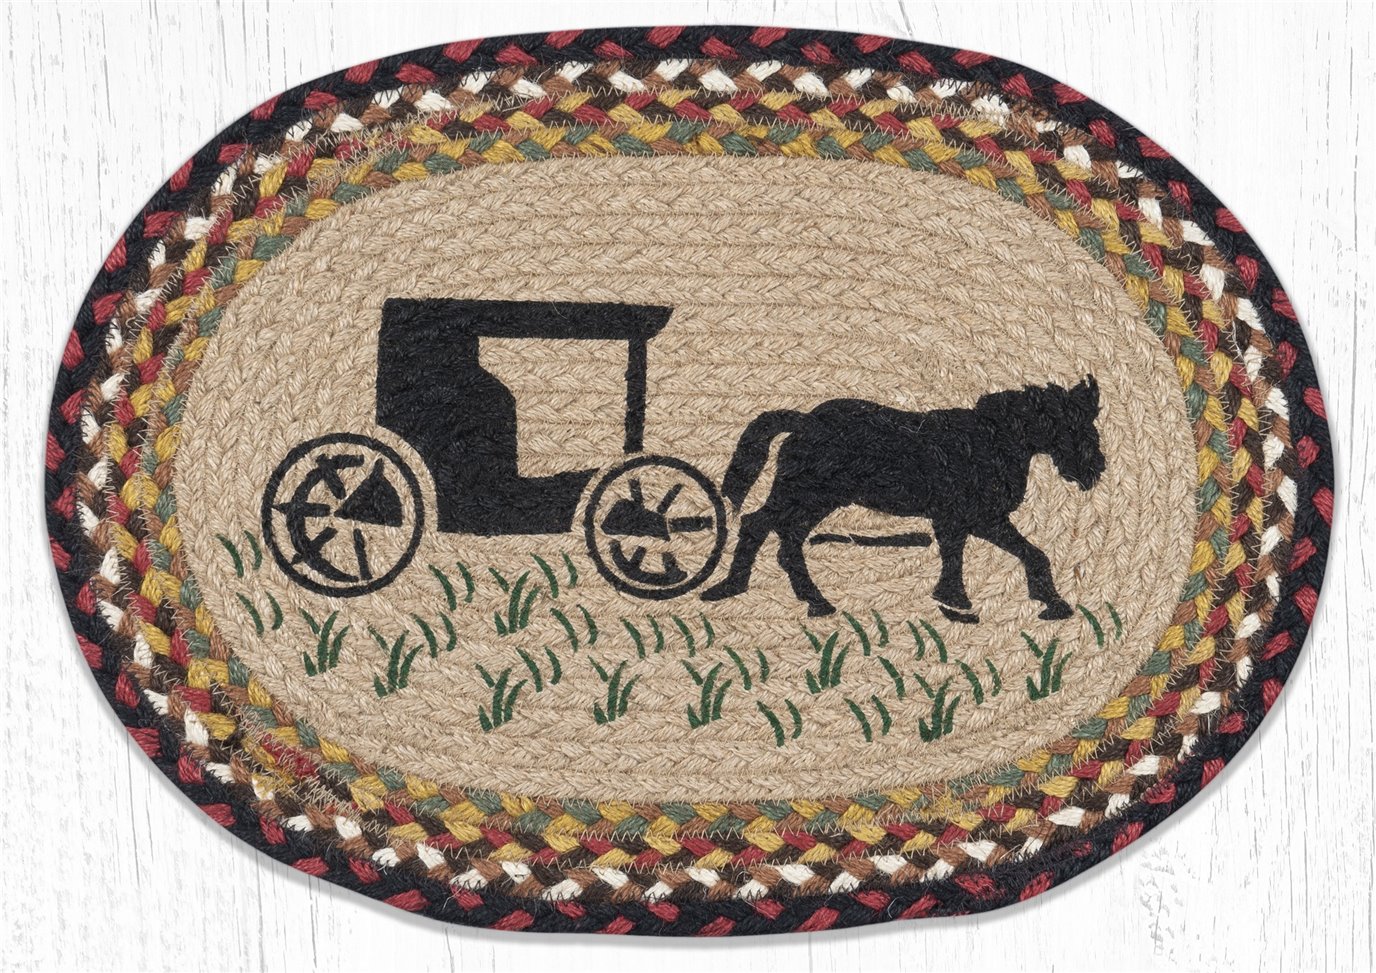 Amish Buggy Oval Braided Placemat 13"x19"